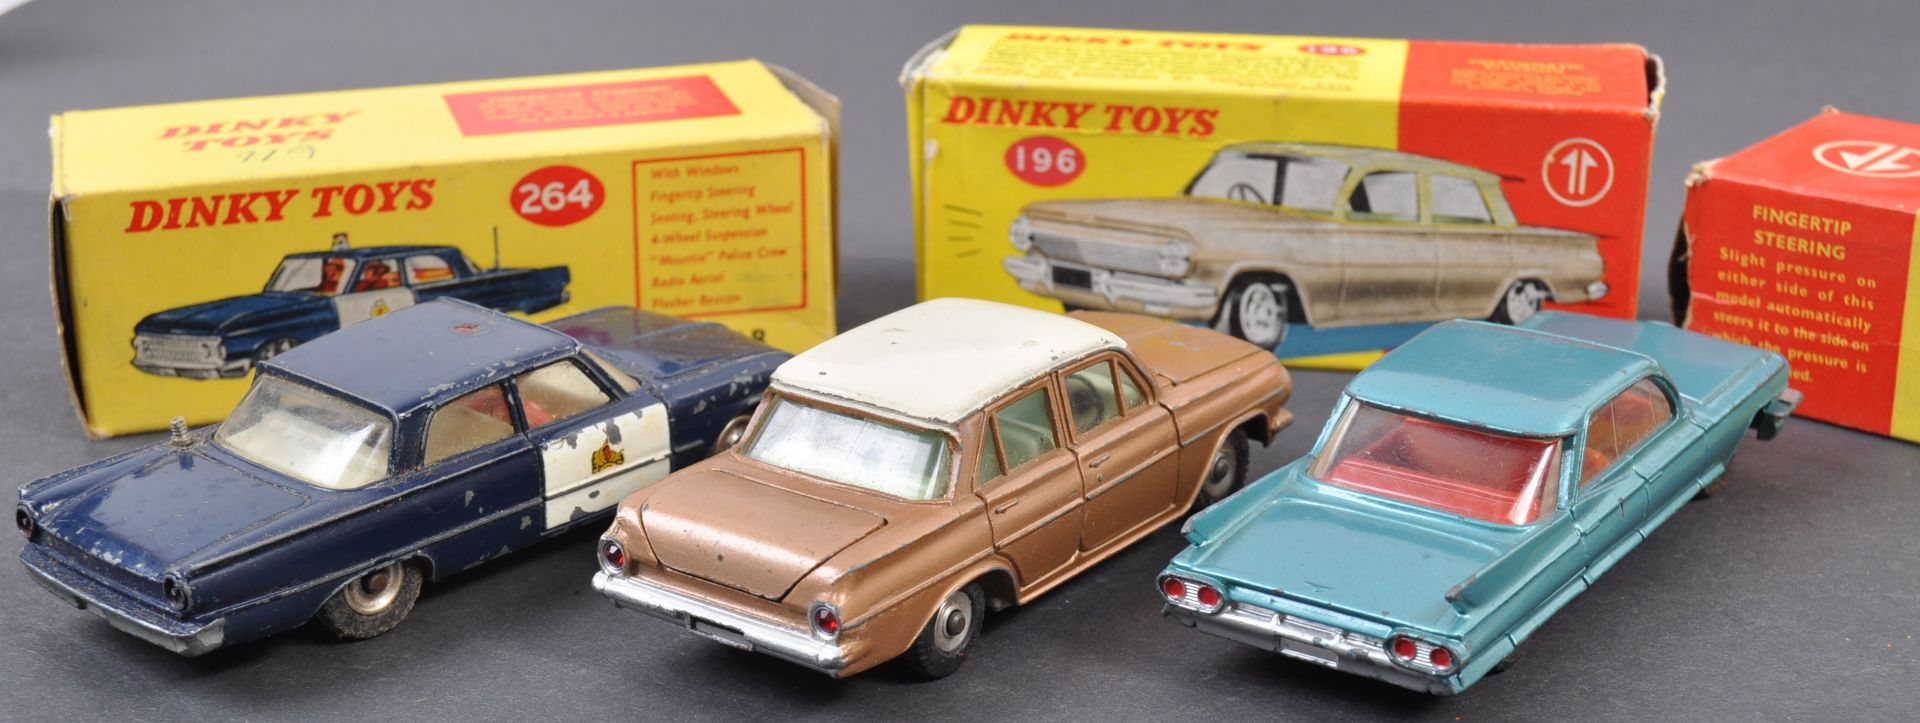 COLLECTION OF VINTAGE DINKY TOYS BOXED DIECAST MODELS - Image 3 of 4